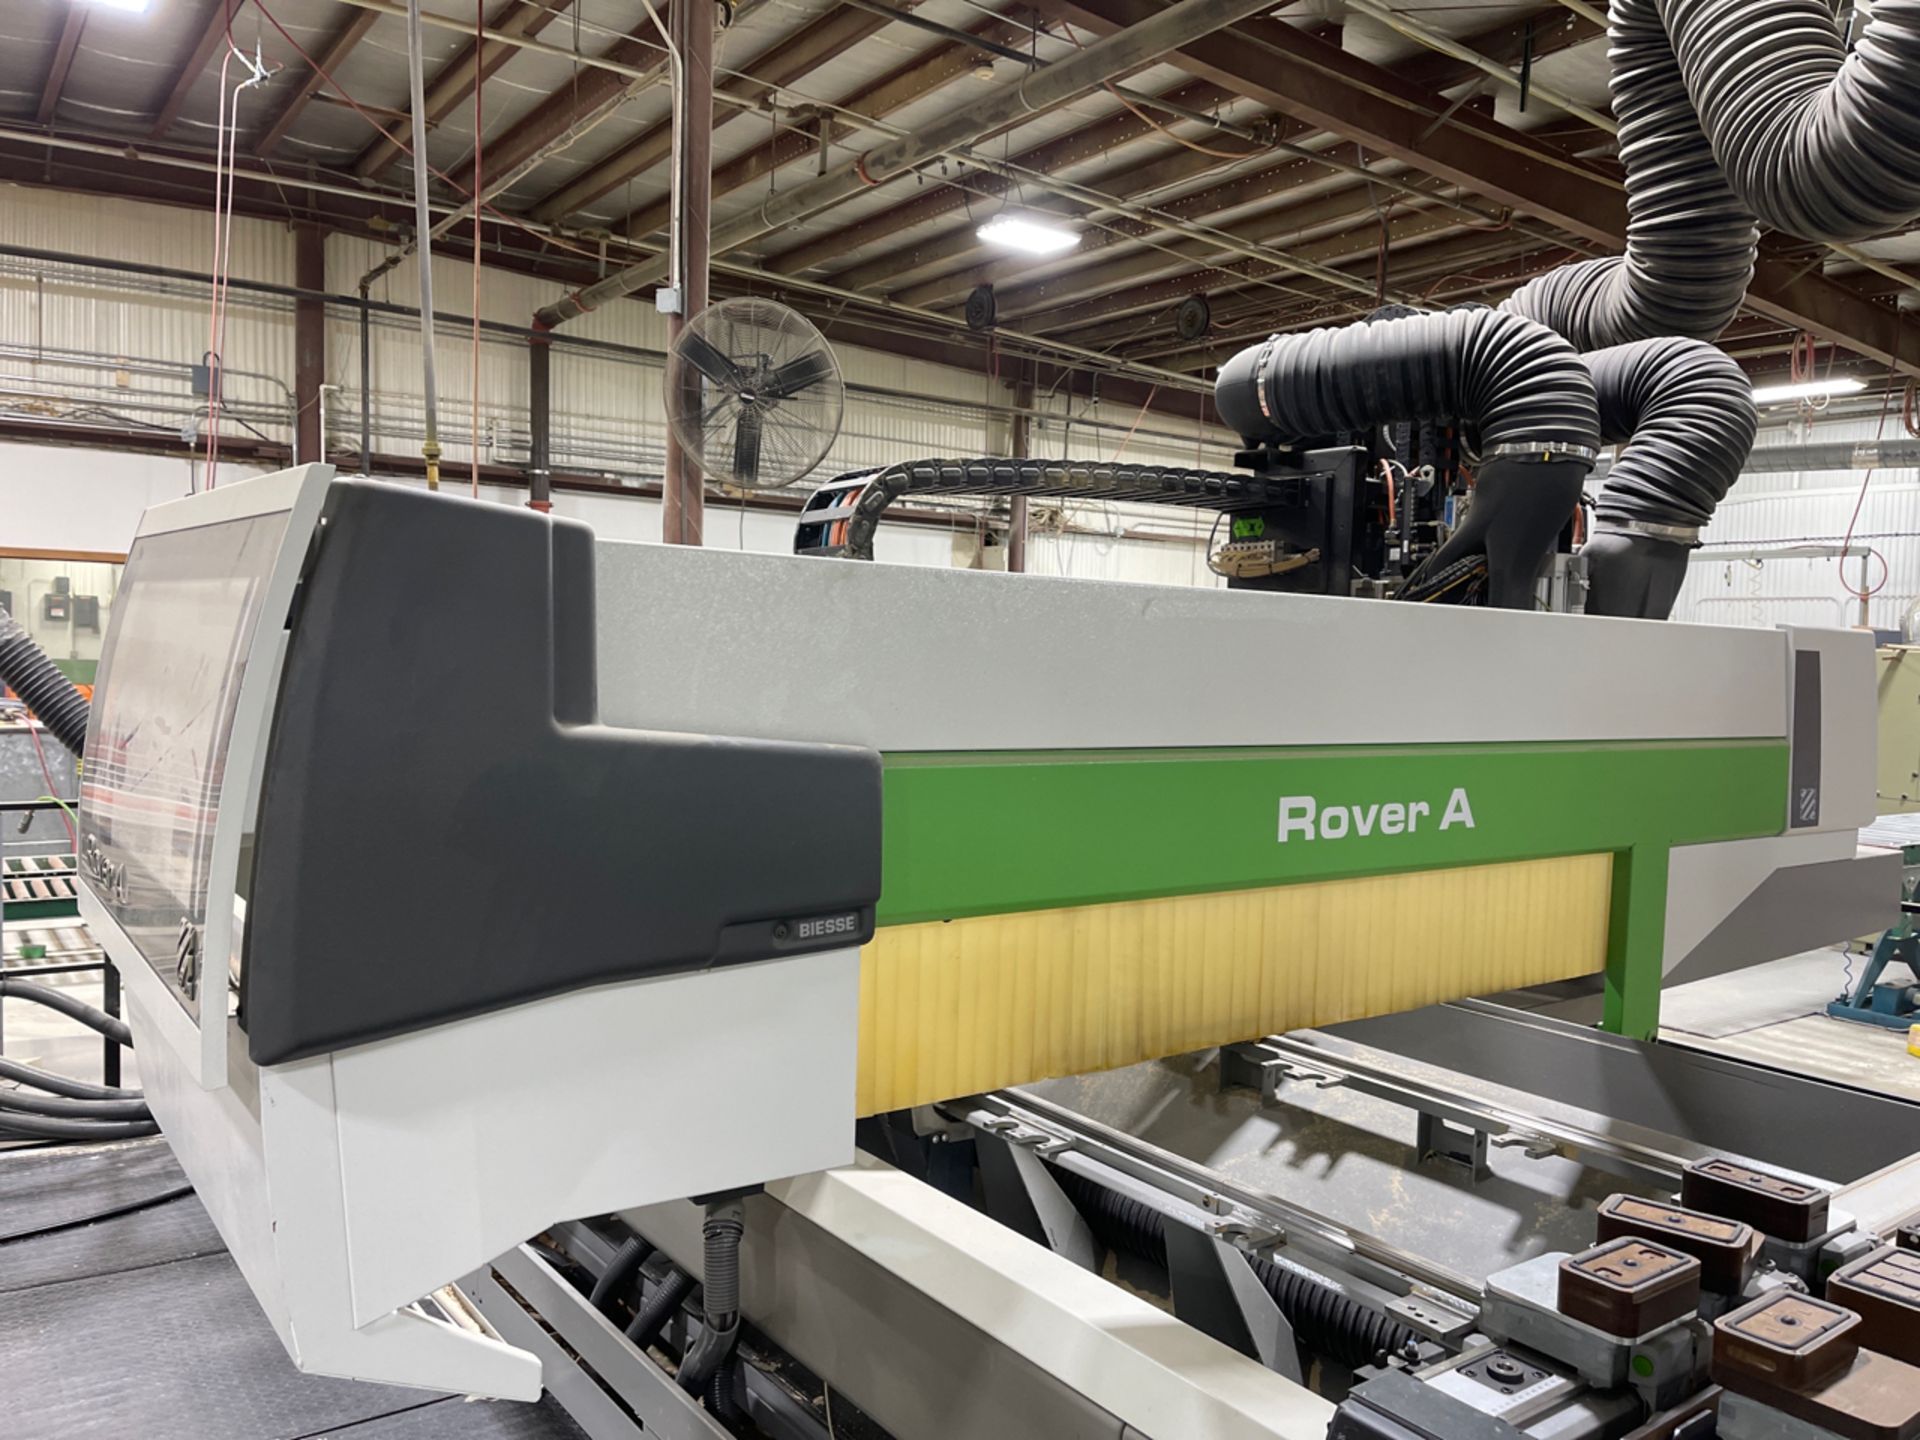 Biesse Rover A 1332 ATS Pod and Rail 4-Axis CNC Router, S/N 35171, New 2012 - Image 11 of 16